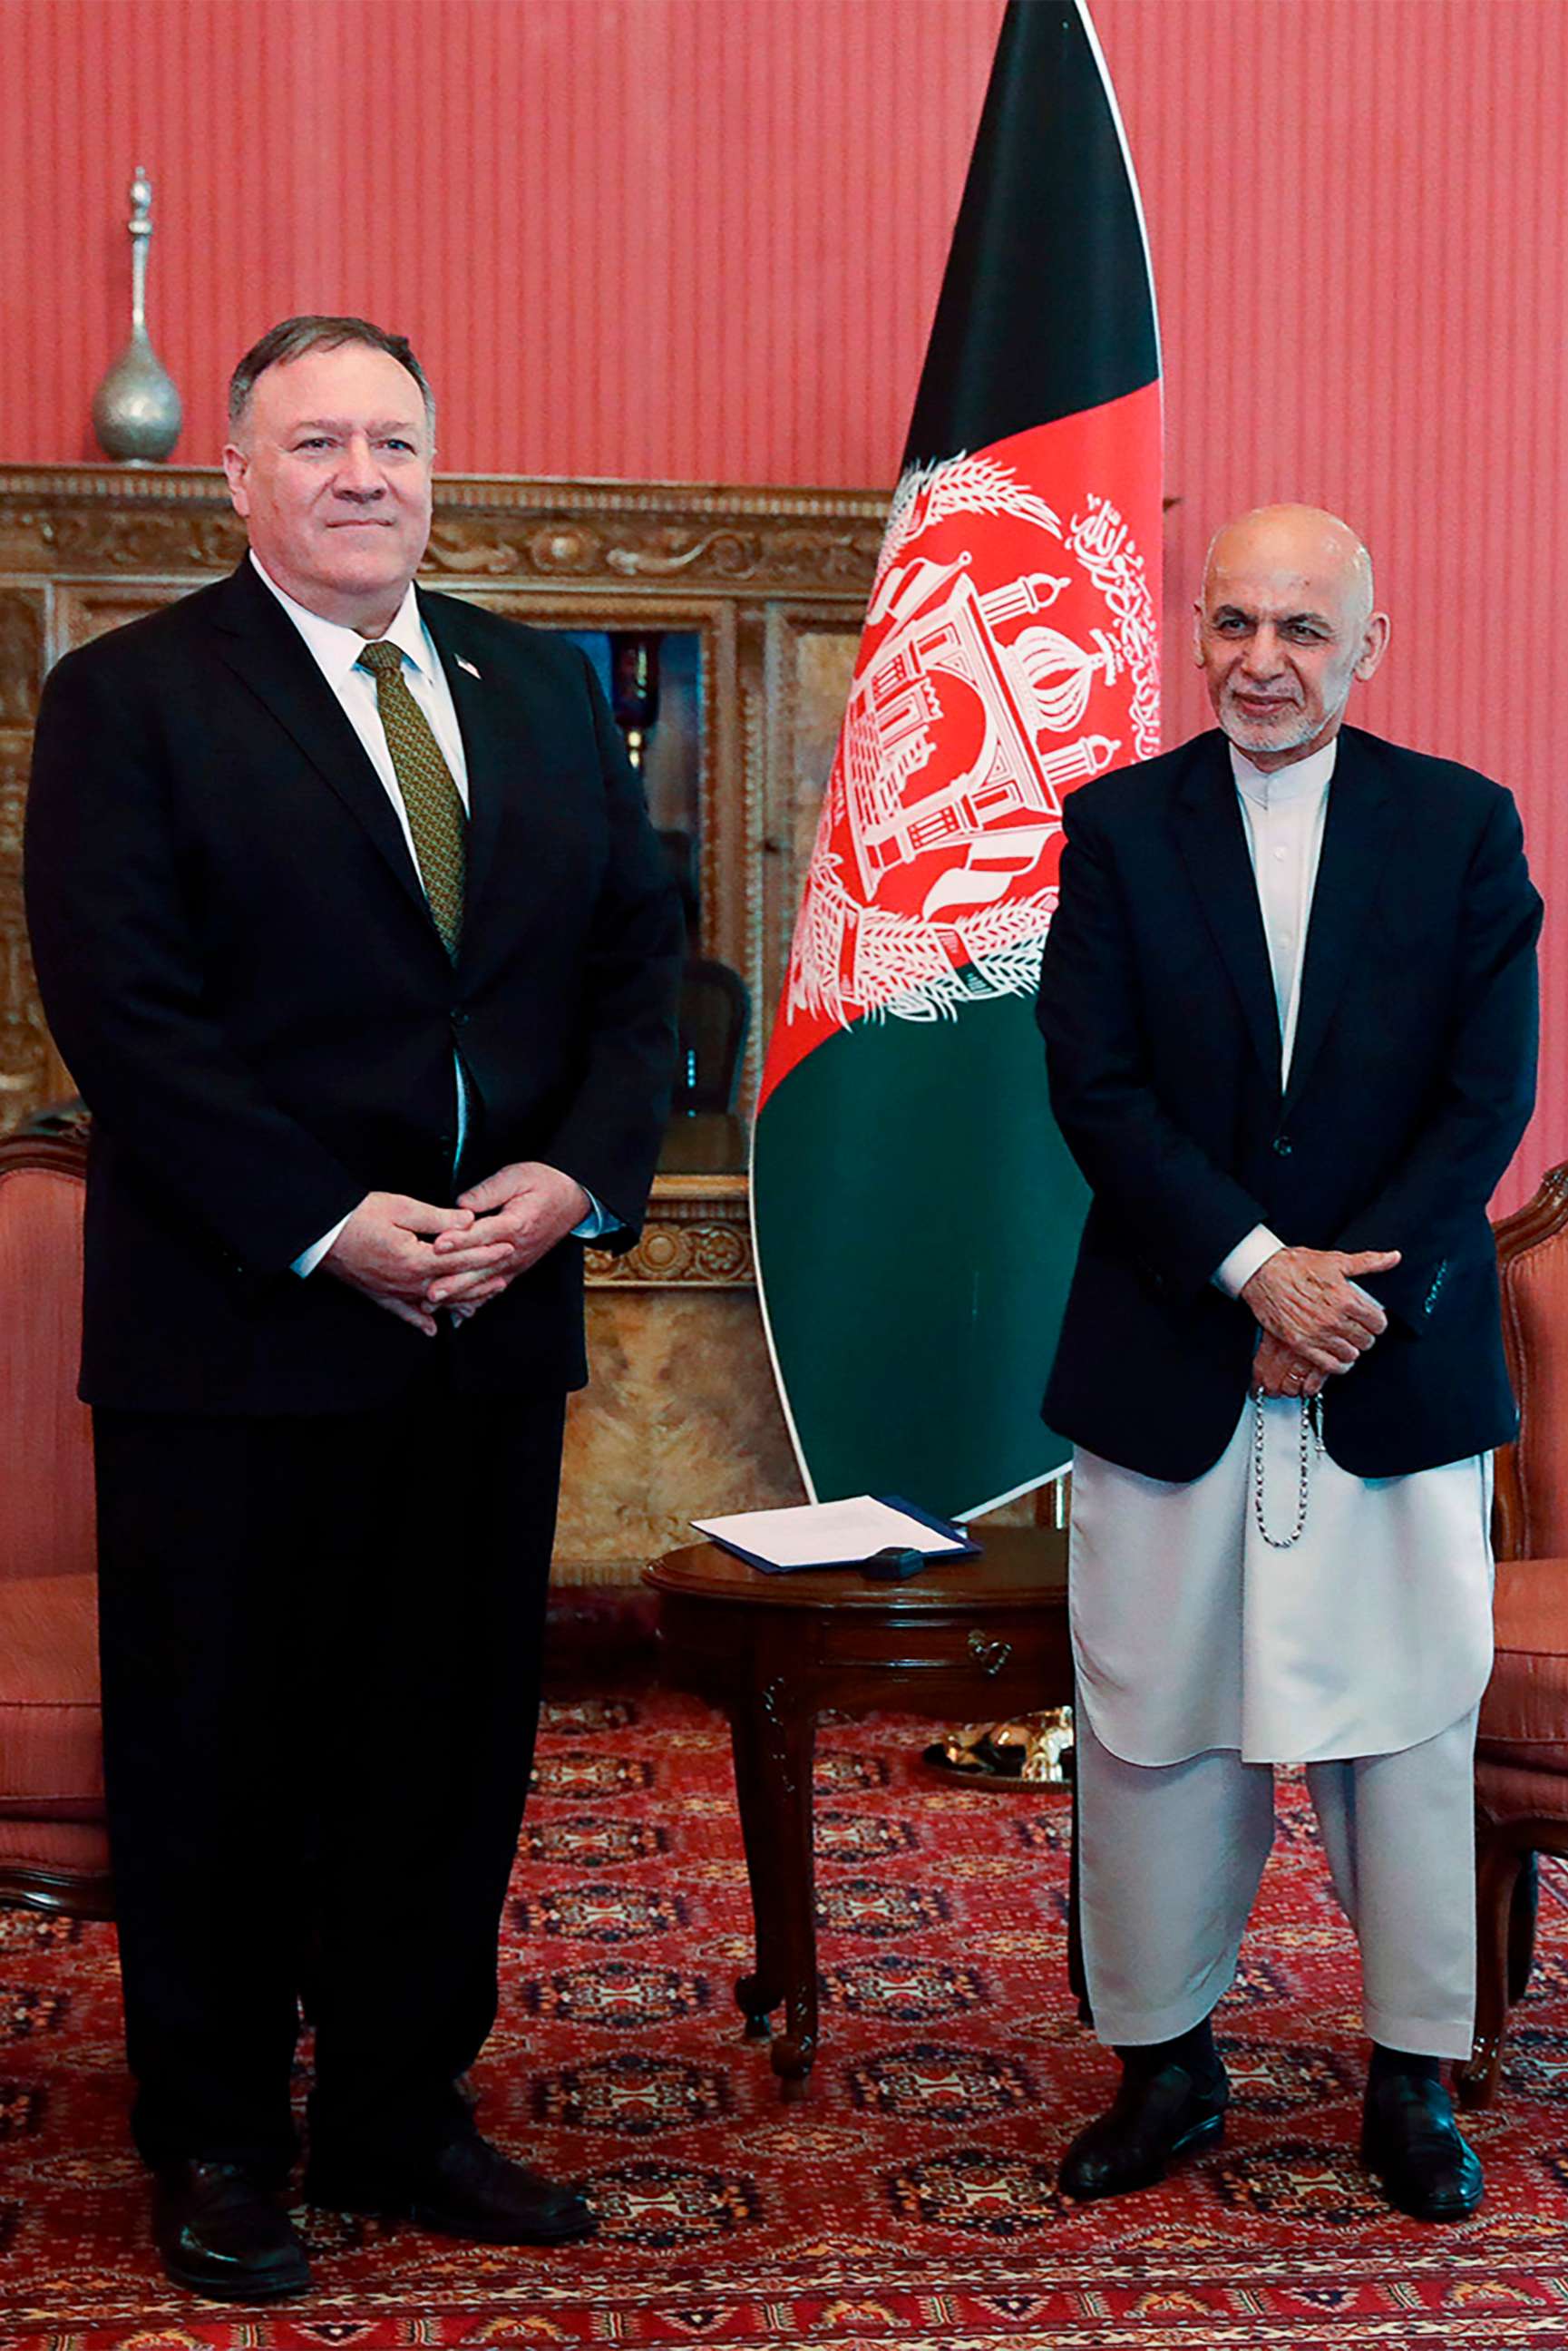 PHOTO: Afghanistan's President Ashraf Ghani poses for a picture with U.S. Secretary of State Mike Pompeo, left, during their meeting in Kabul, March 23, 2020.